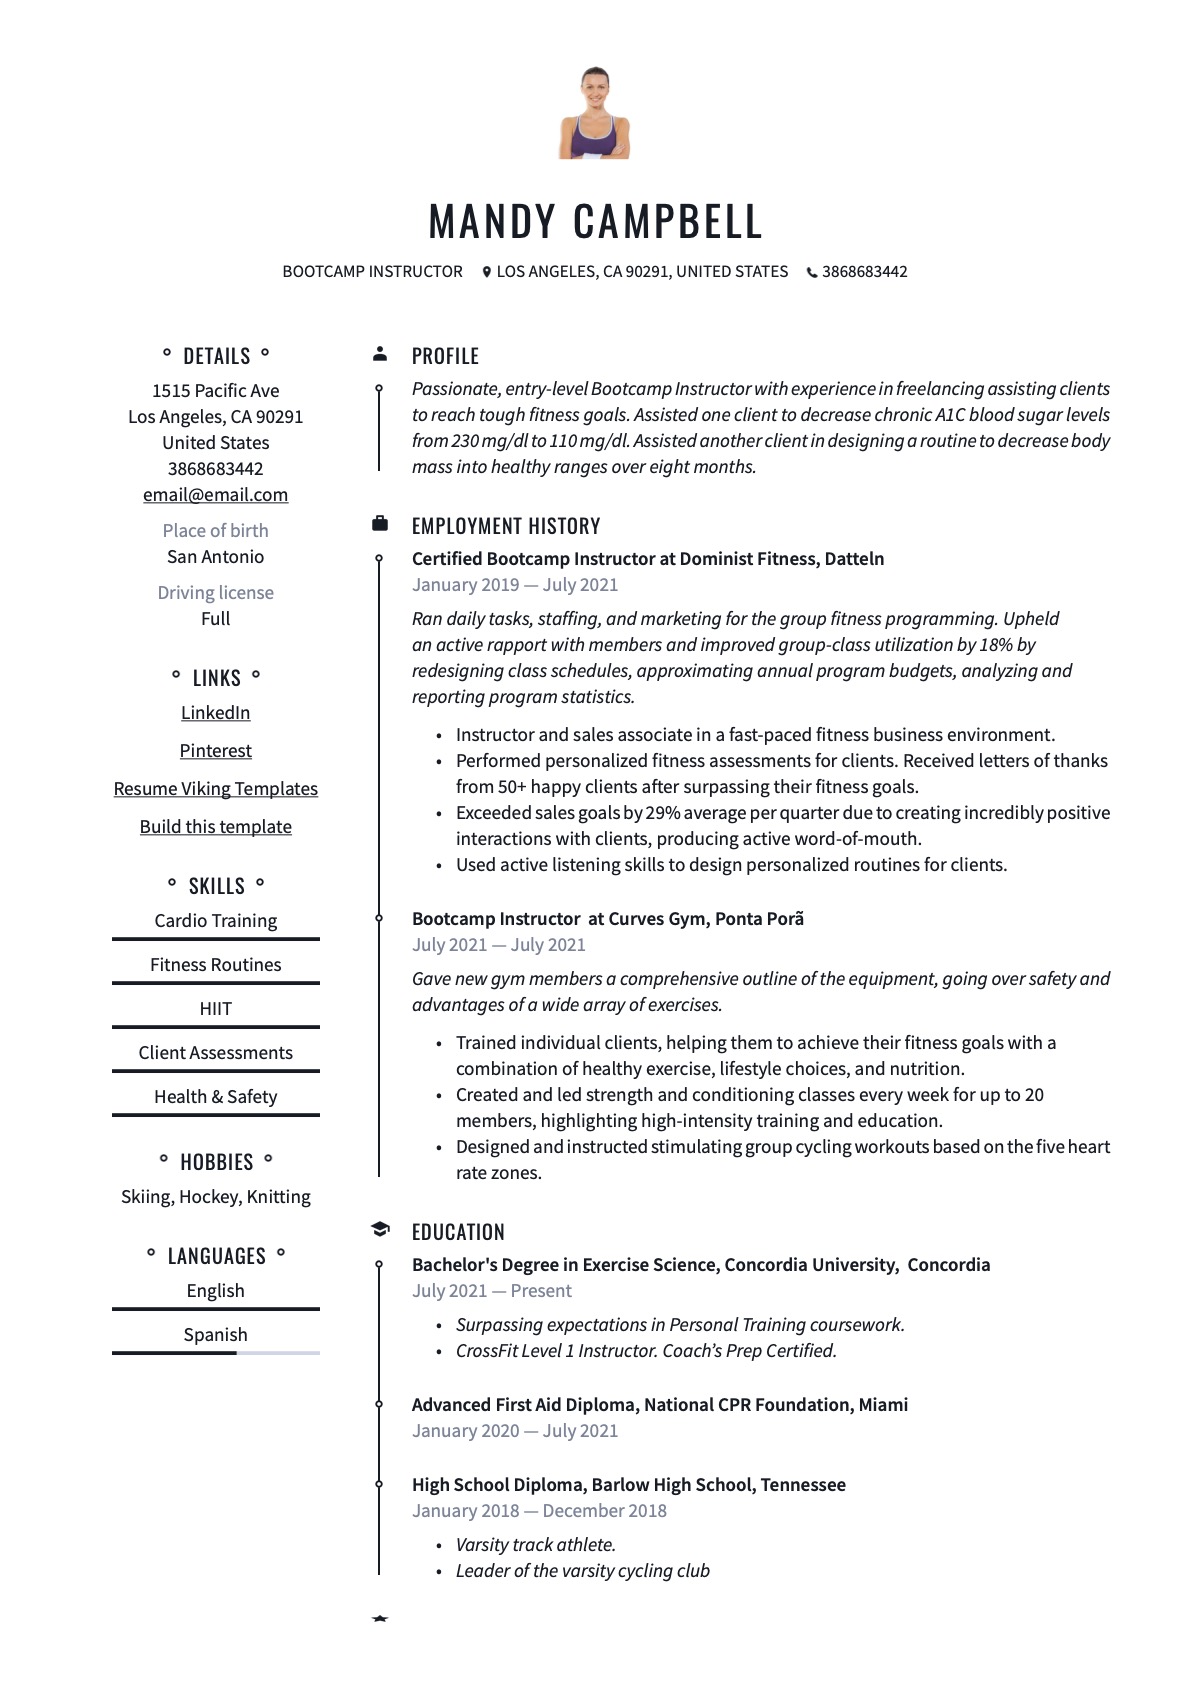 Professional Bootcamp Instructor Resume Example